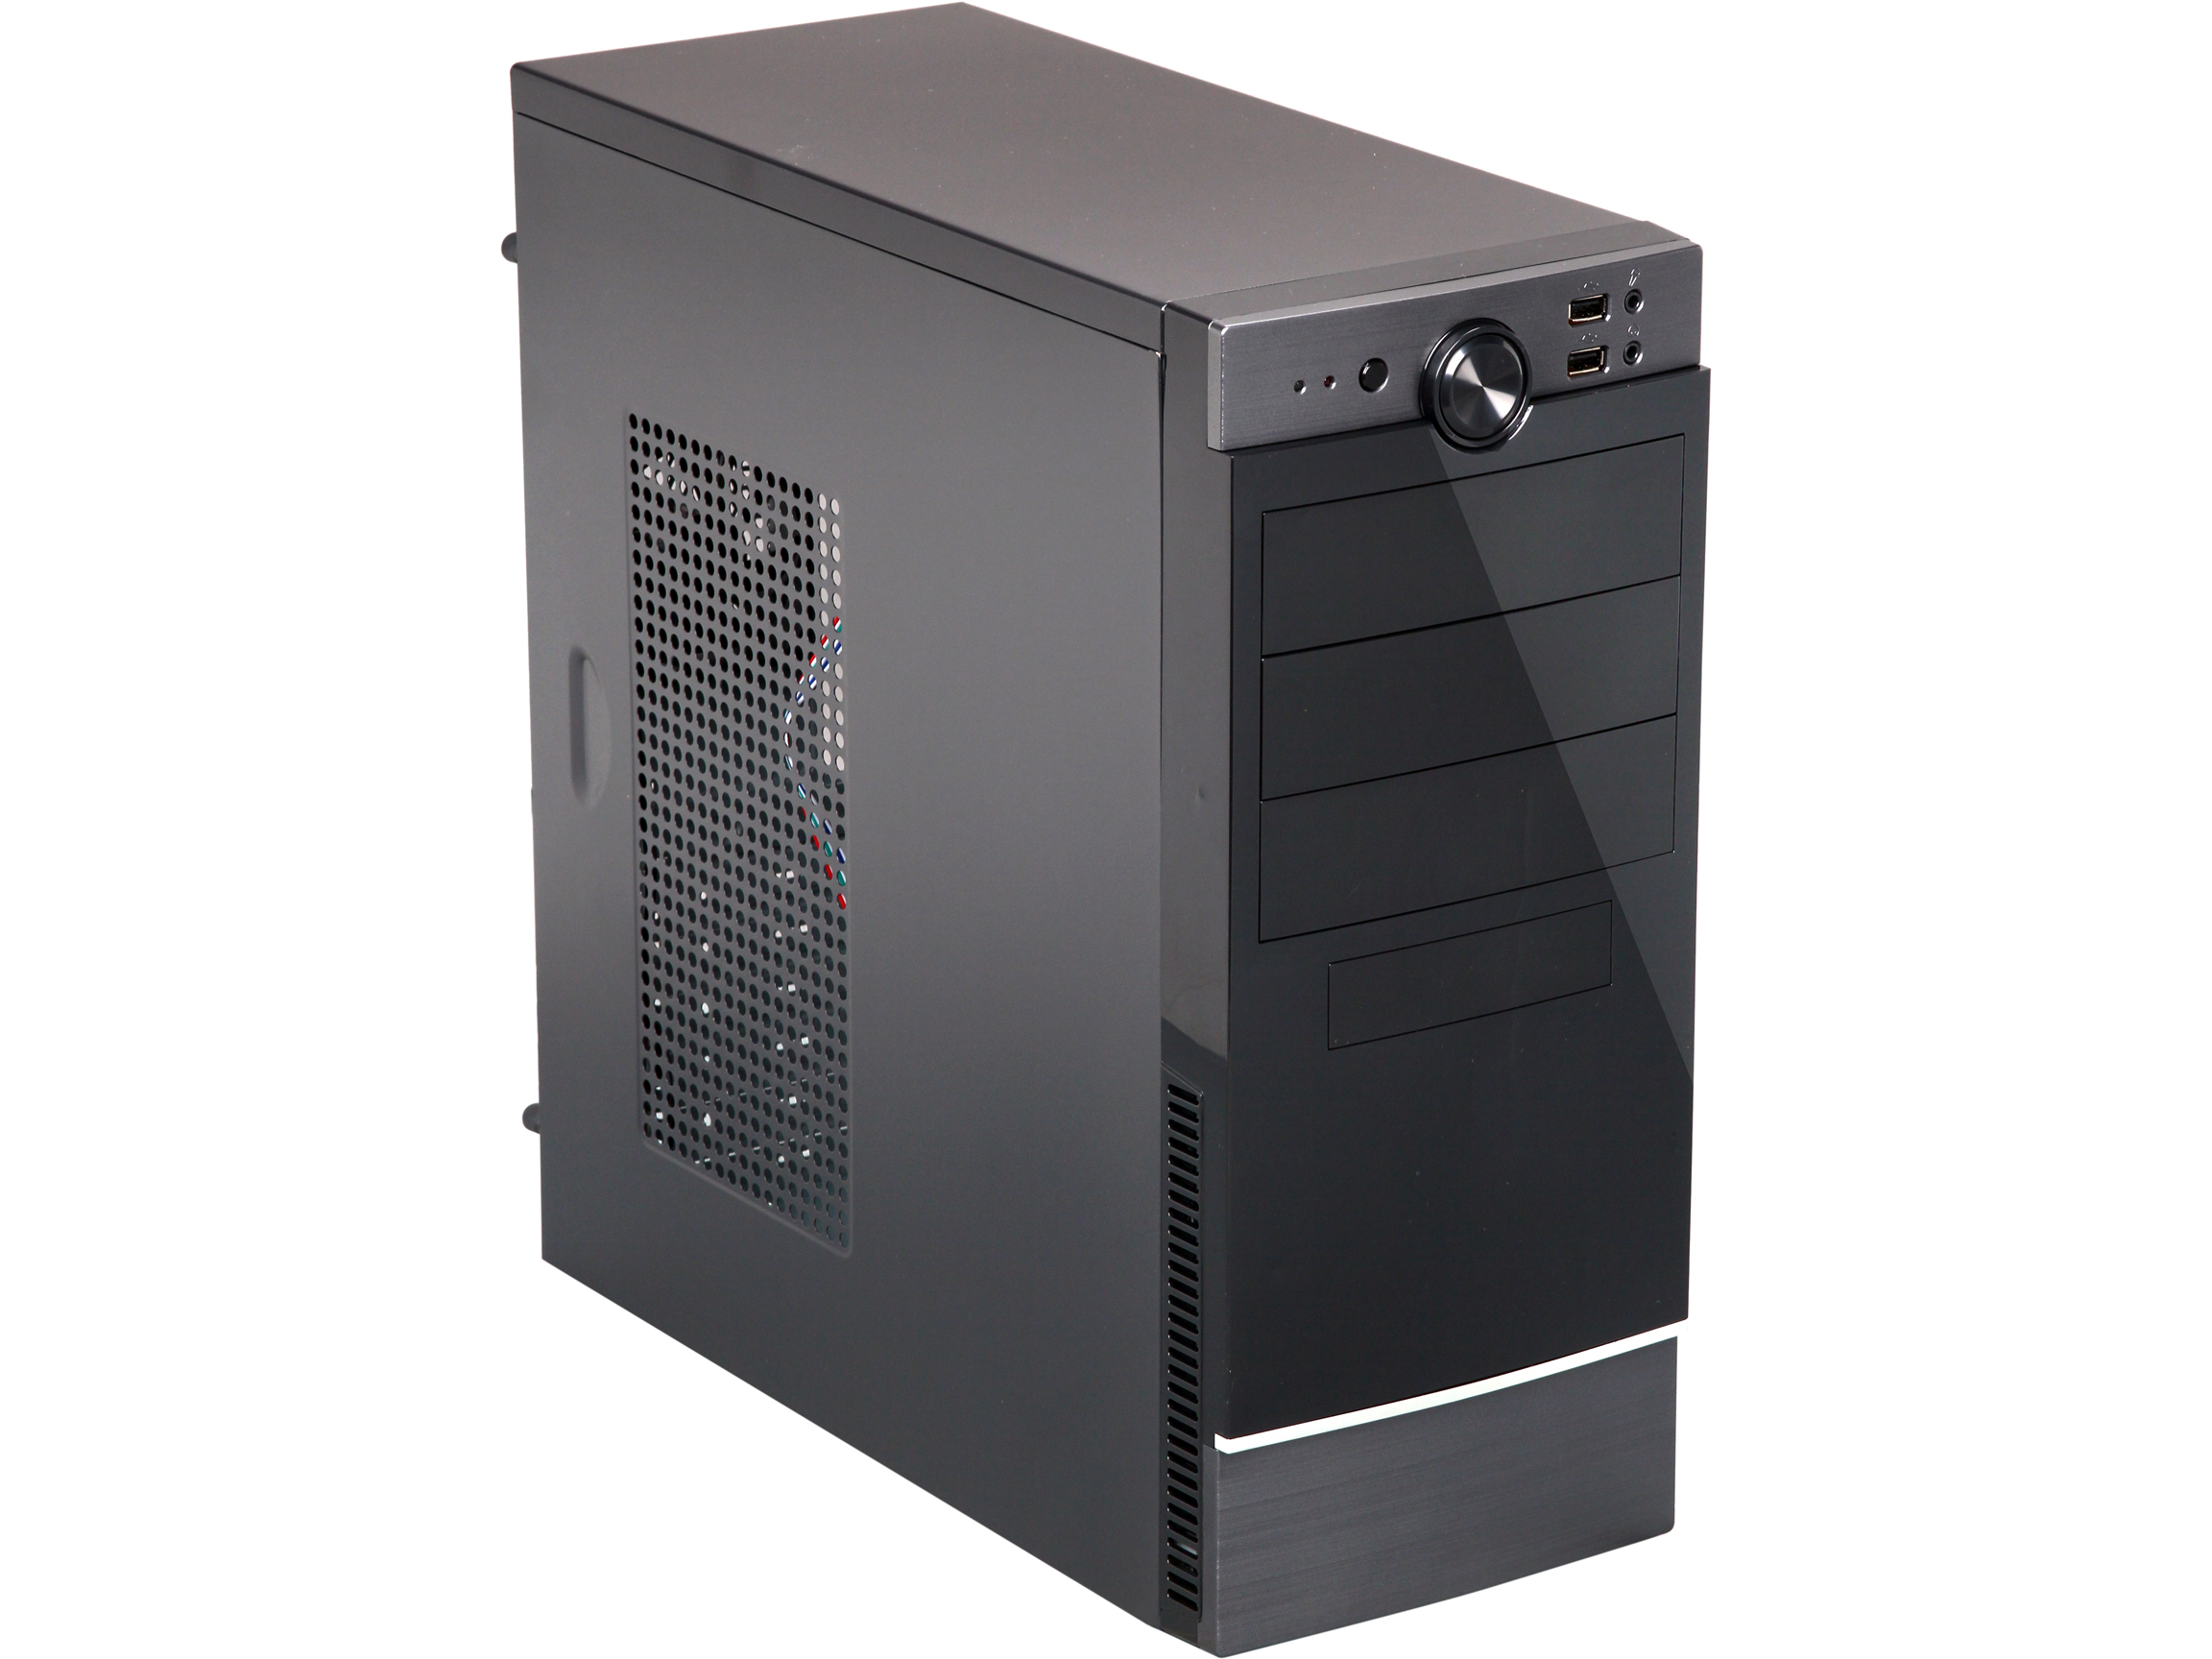 Rosewill FB 04 Dual Fans ATX Mid Tower Computer Case